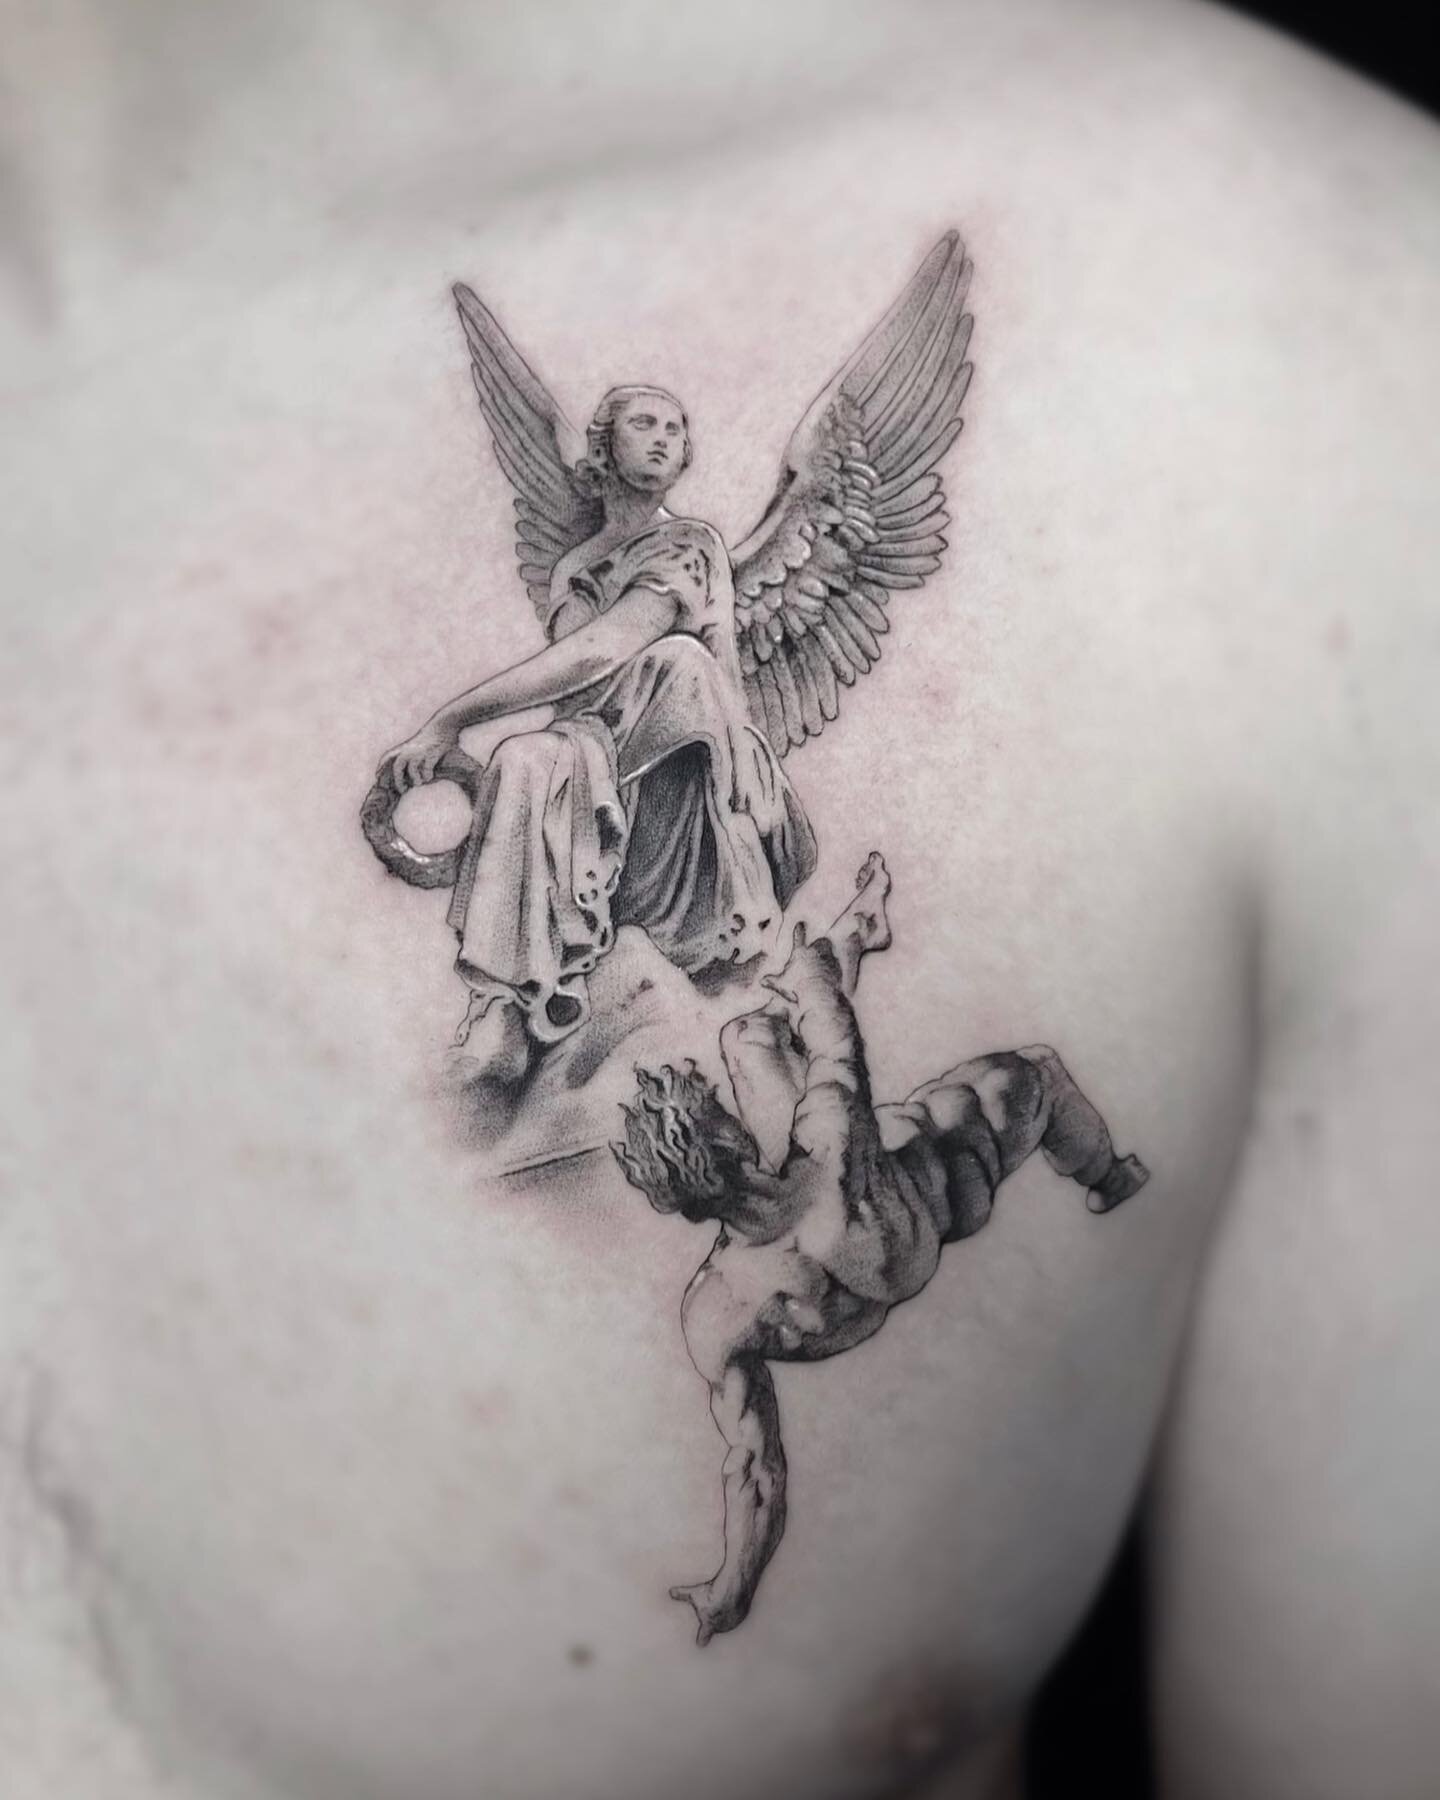 The fall of Icarus
.
For booking please visit
Codeydoran.com or email
Booking@codeydoran.com
.
Done with @emalla.official 
#thefalloficarus
#thefalloficarustattoo 
#emallacartridges